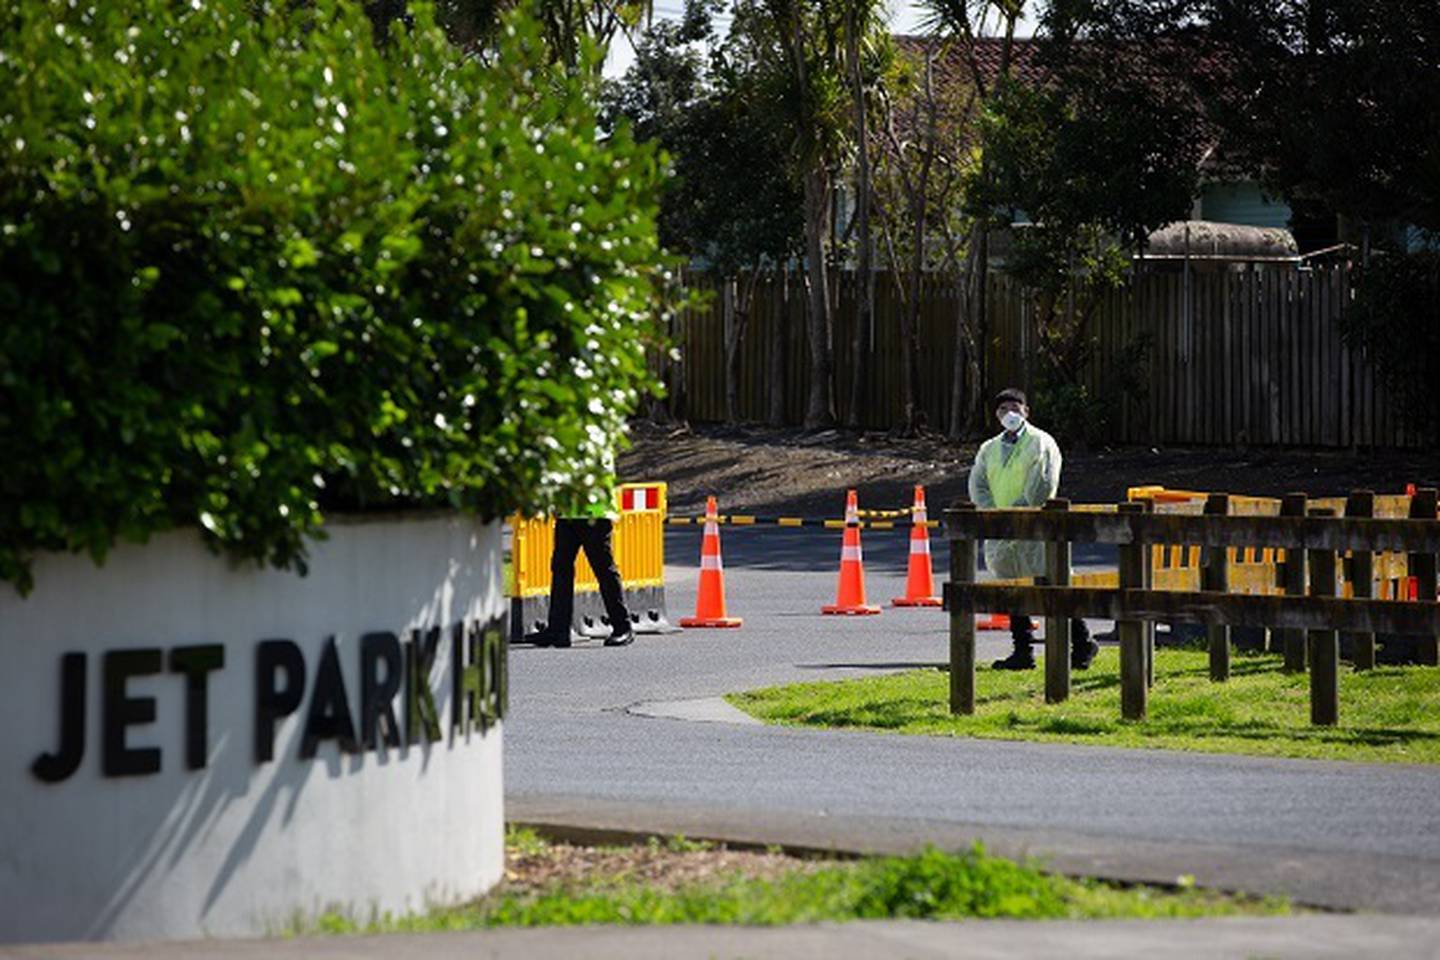 The Jet Park quarantine facility in Mangere. Photo / Sylvie Whinray